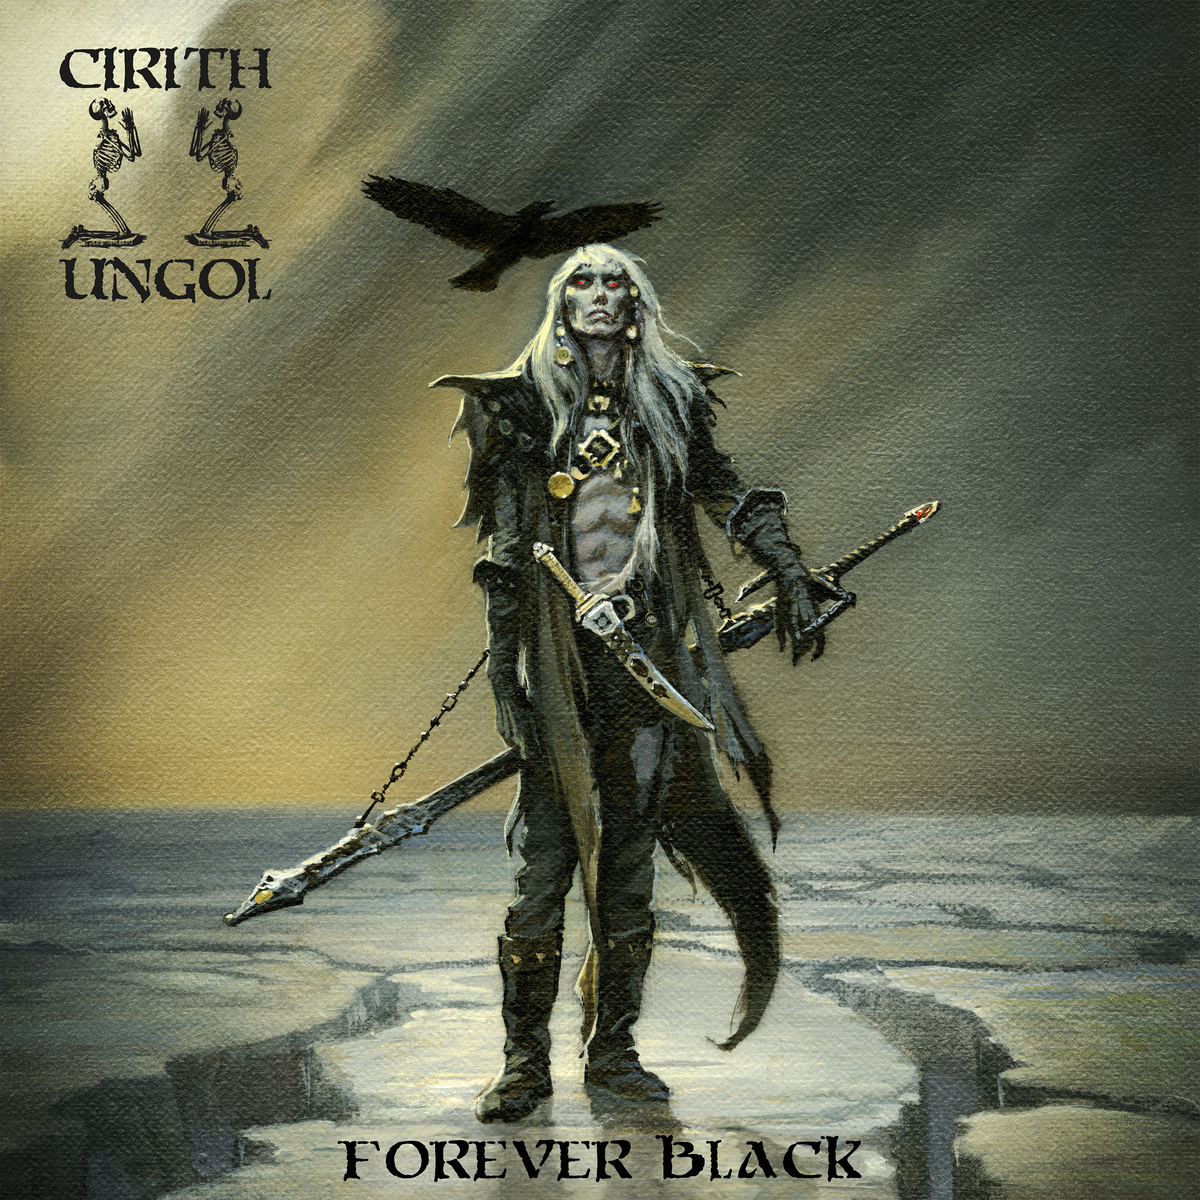 EVGXF2 U0AEg MM "As always, pinpointed by the quixotic vocals of Tim Baker; this album picks up, right where that vaunted decade ended." Head over to @BraveWords666 for a review on the upcoming @CirithU record, #ForeverBlack - out April 24th! http://bravewords.com/reviews/cirith-ungol-forever-black …pic.twitter.com/ppVUFEn5dk | Cirith Ungol Online